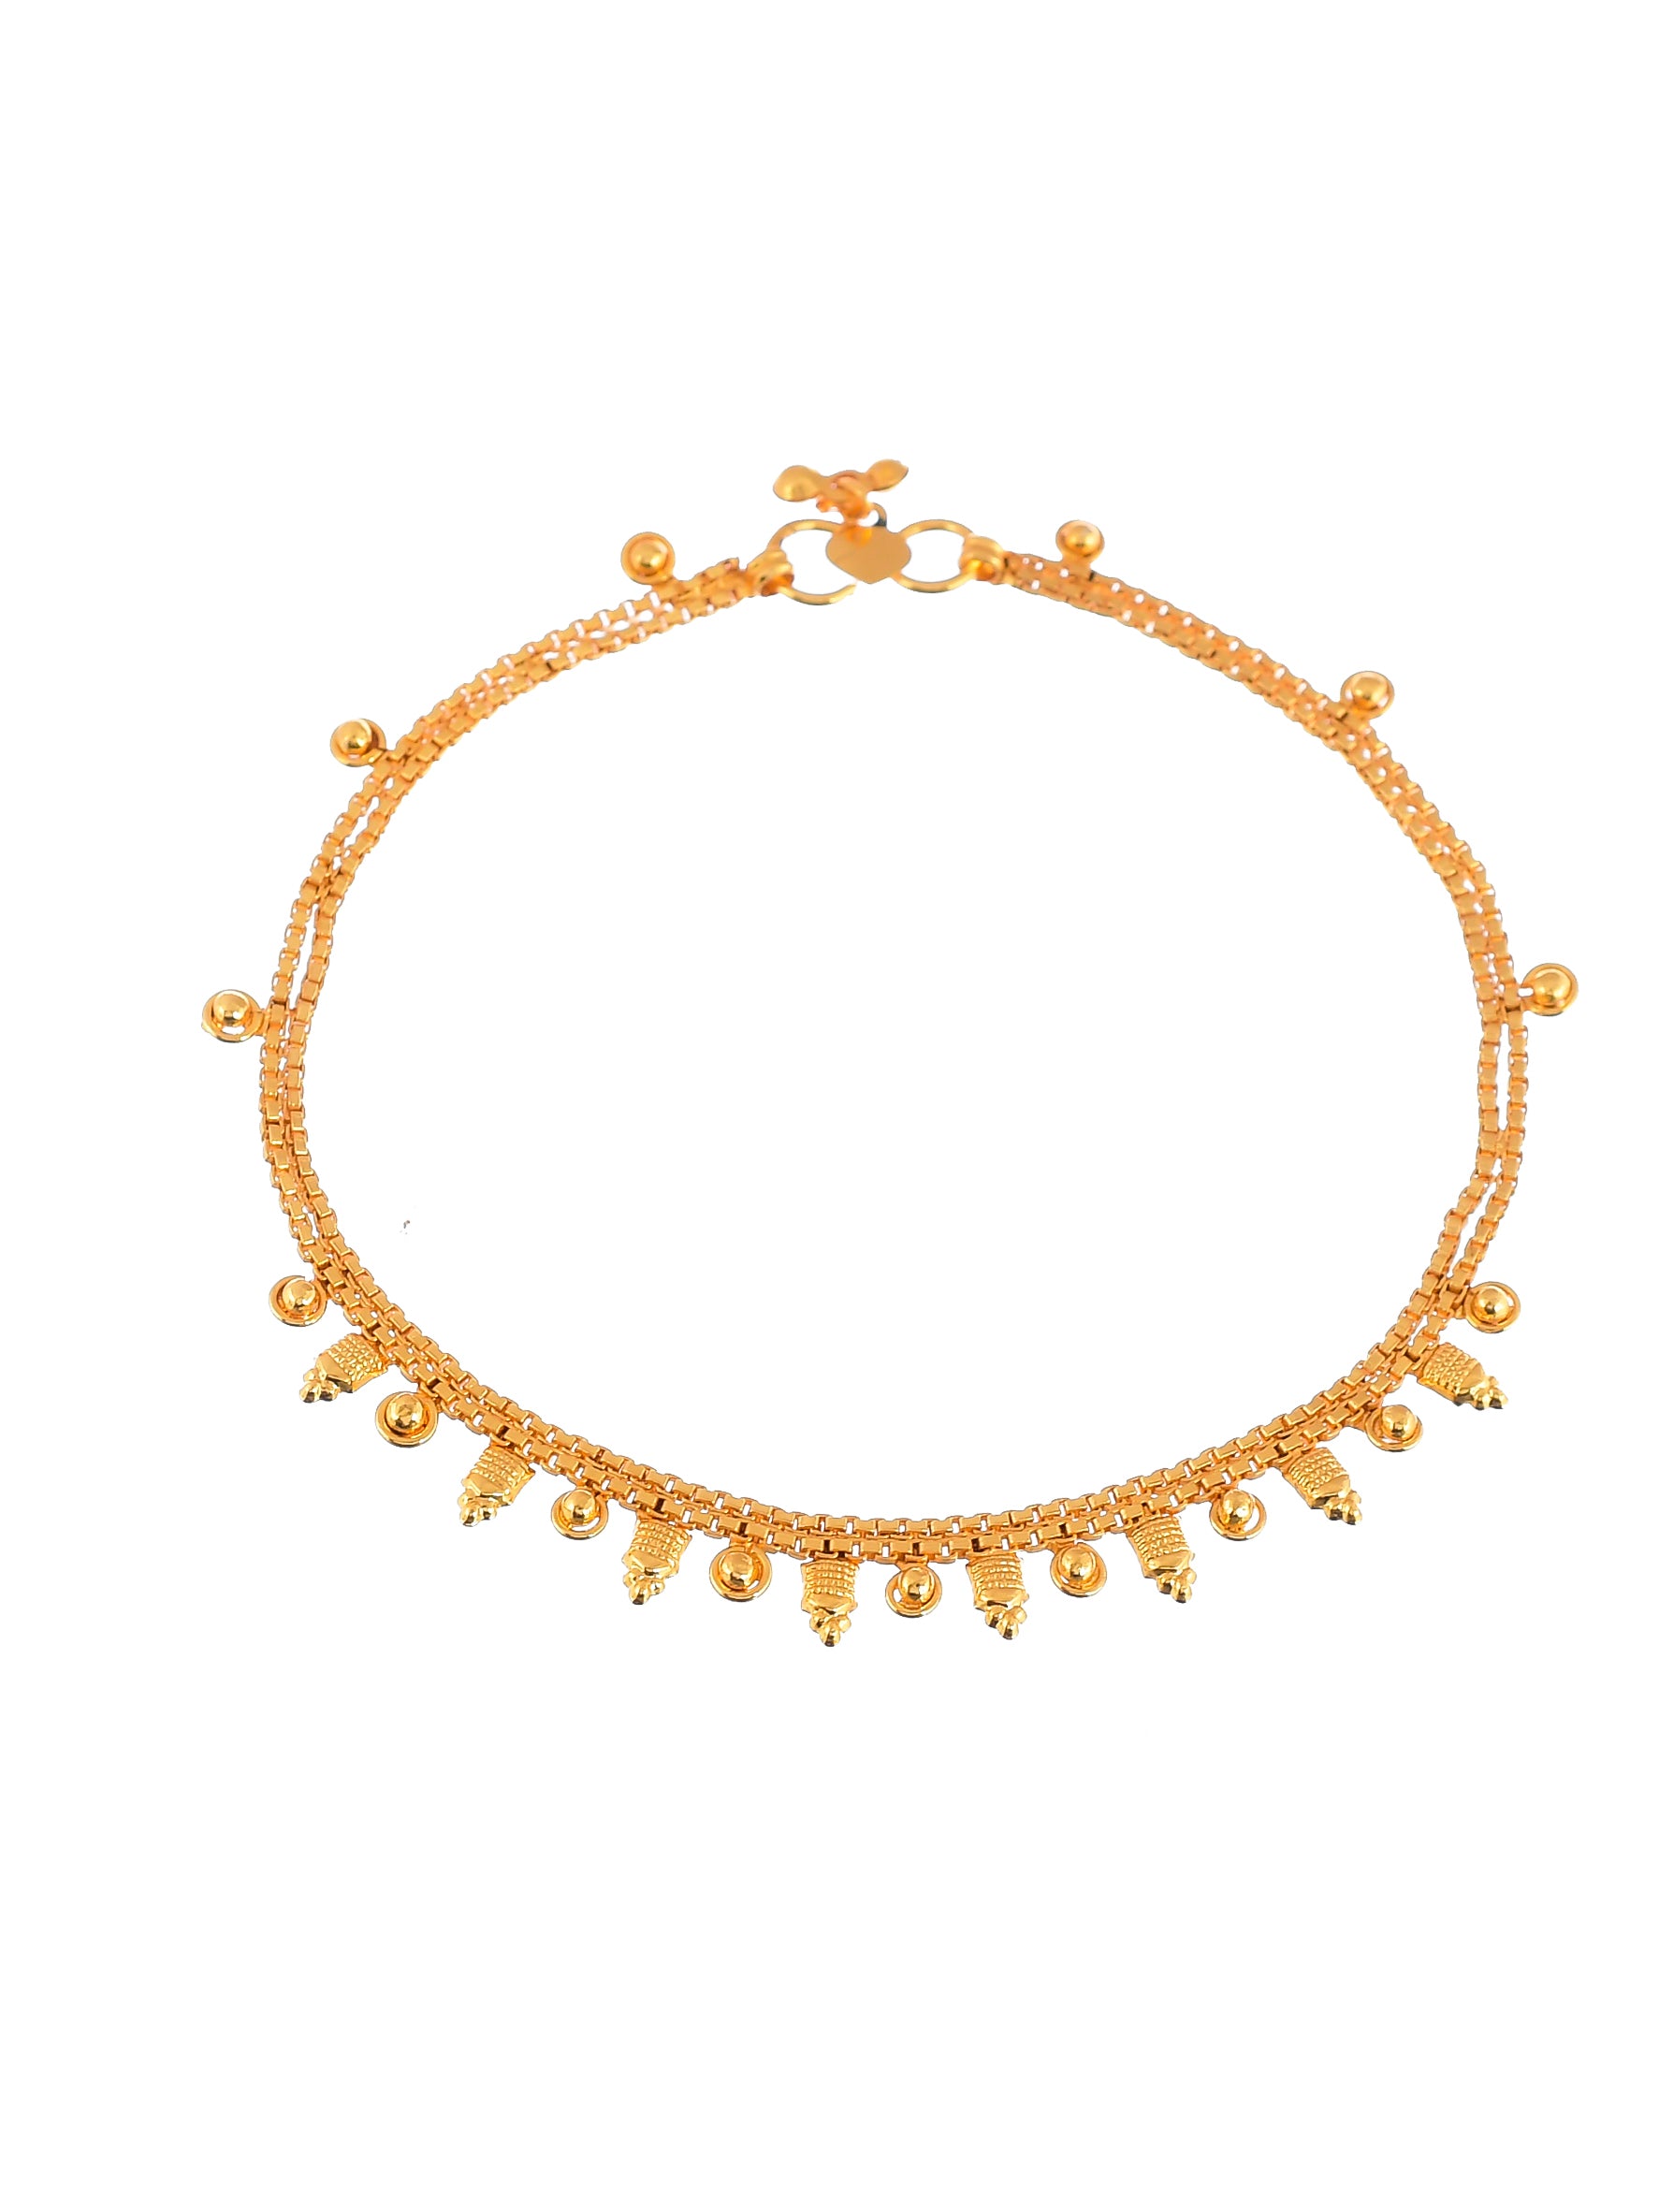 Unisex Golden Delicate Chain Payal Anklet